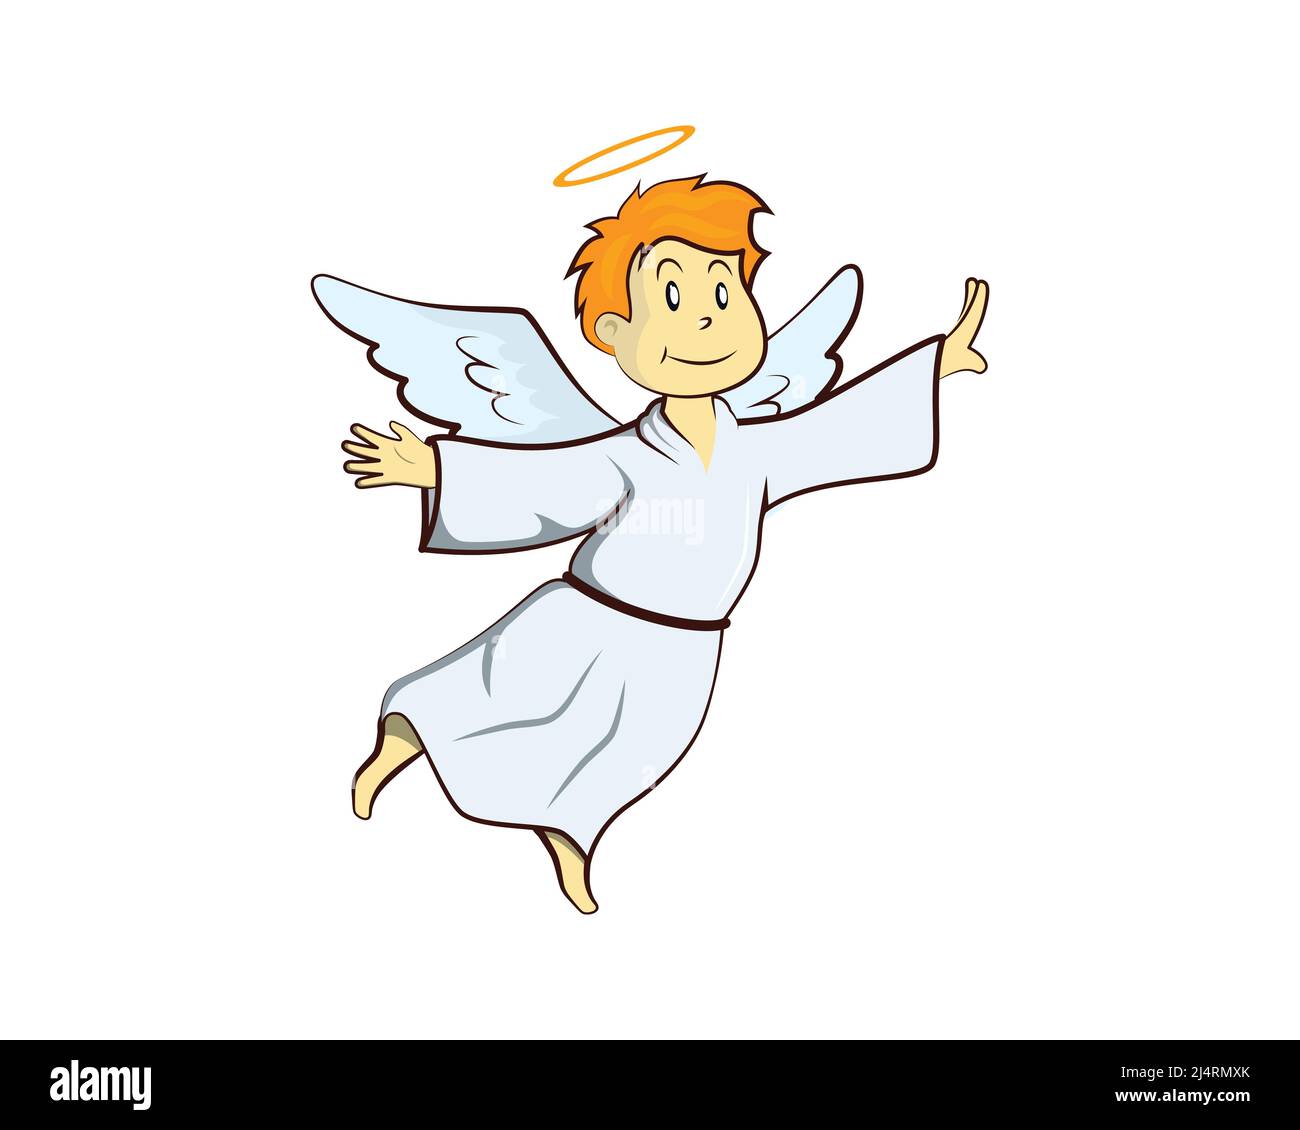 Cute Flying Angel Illustration with Cartoon Style Vector Stock Vector